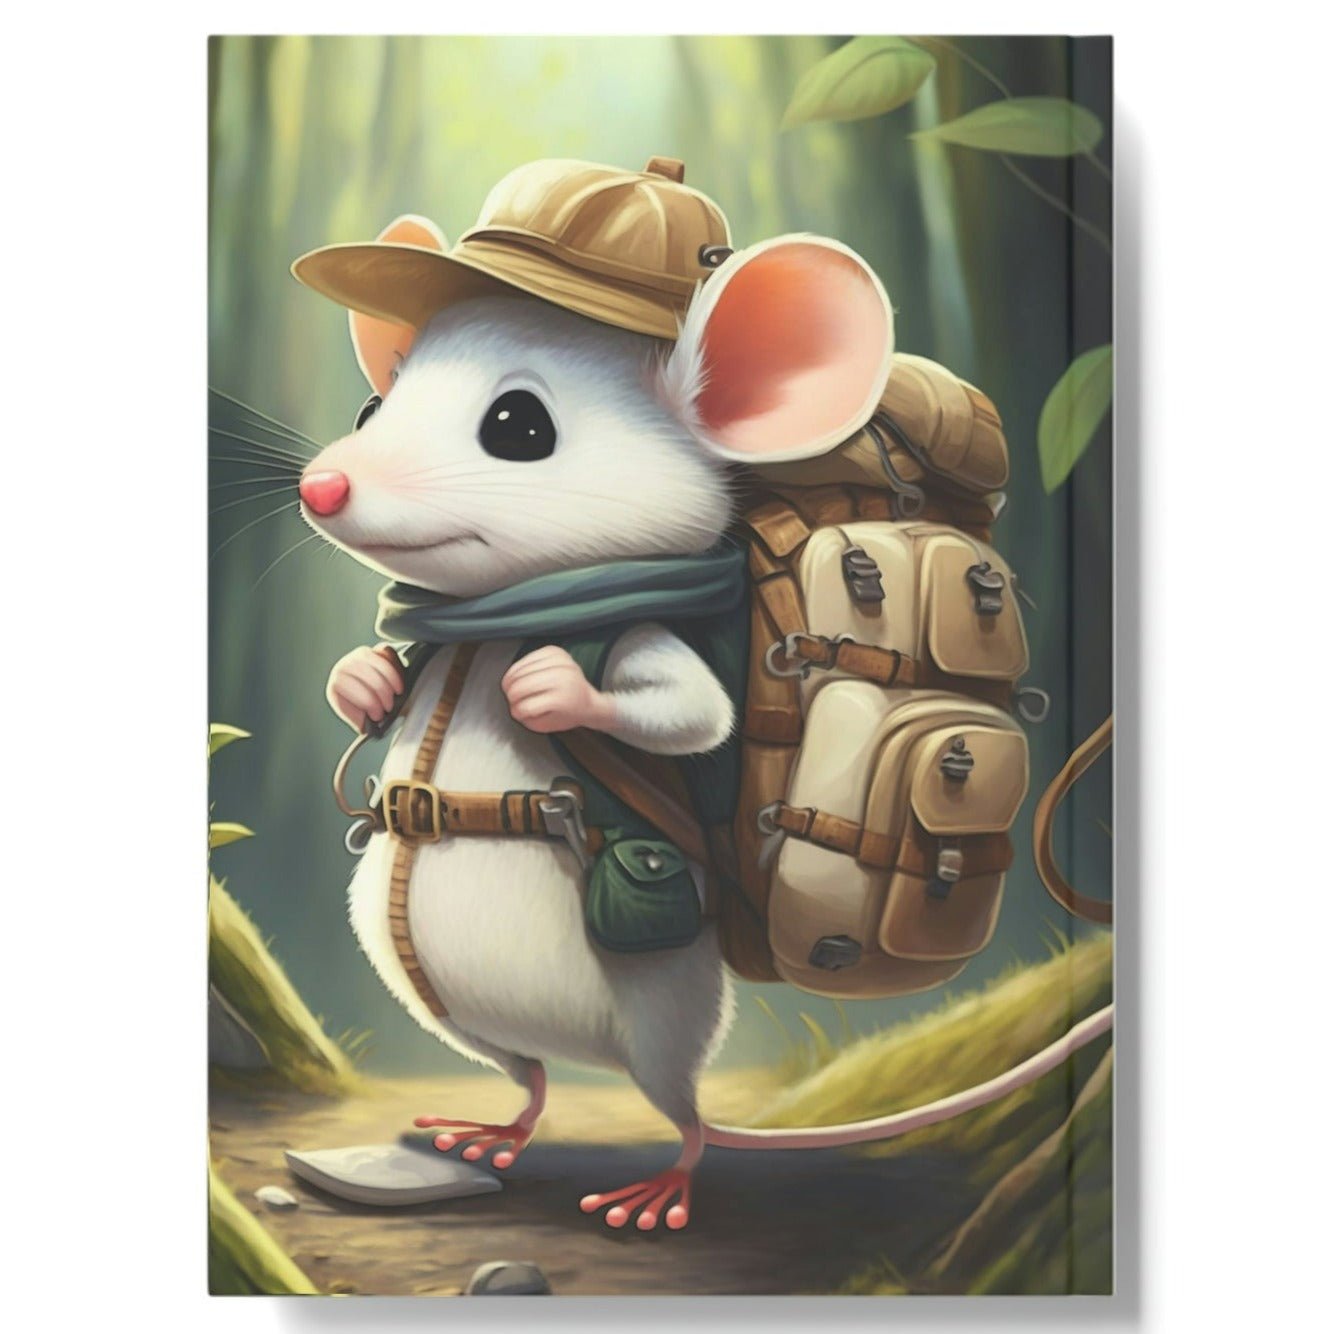 Hiking Mouse Hard Backed Journal